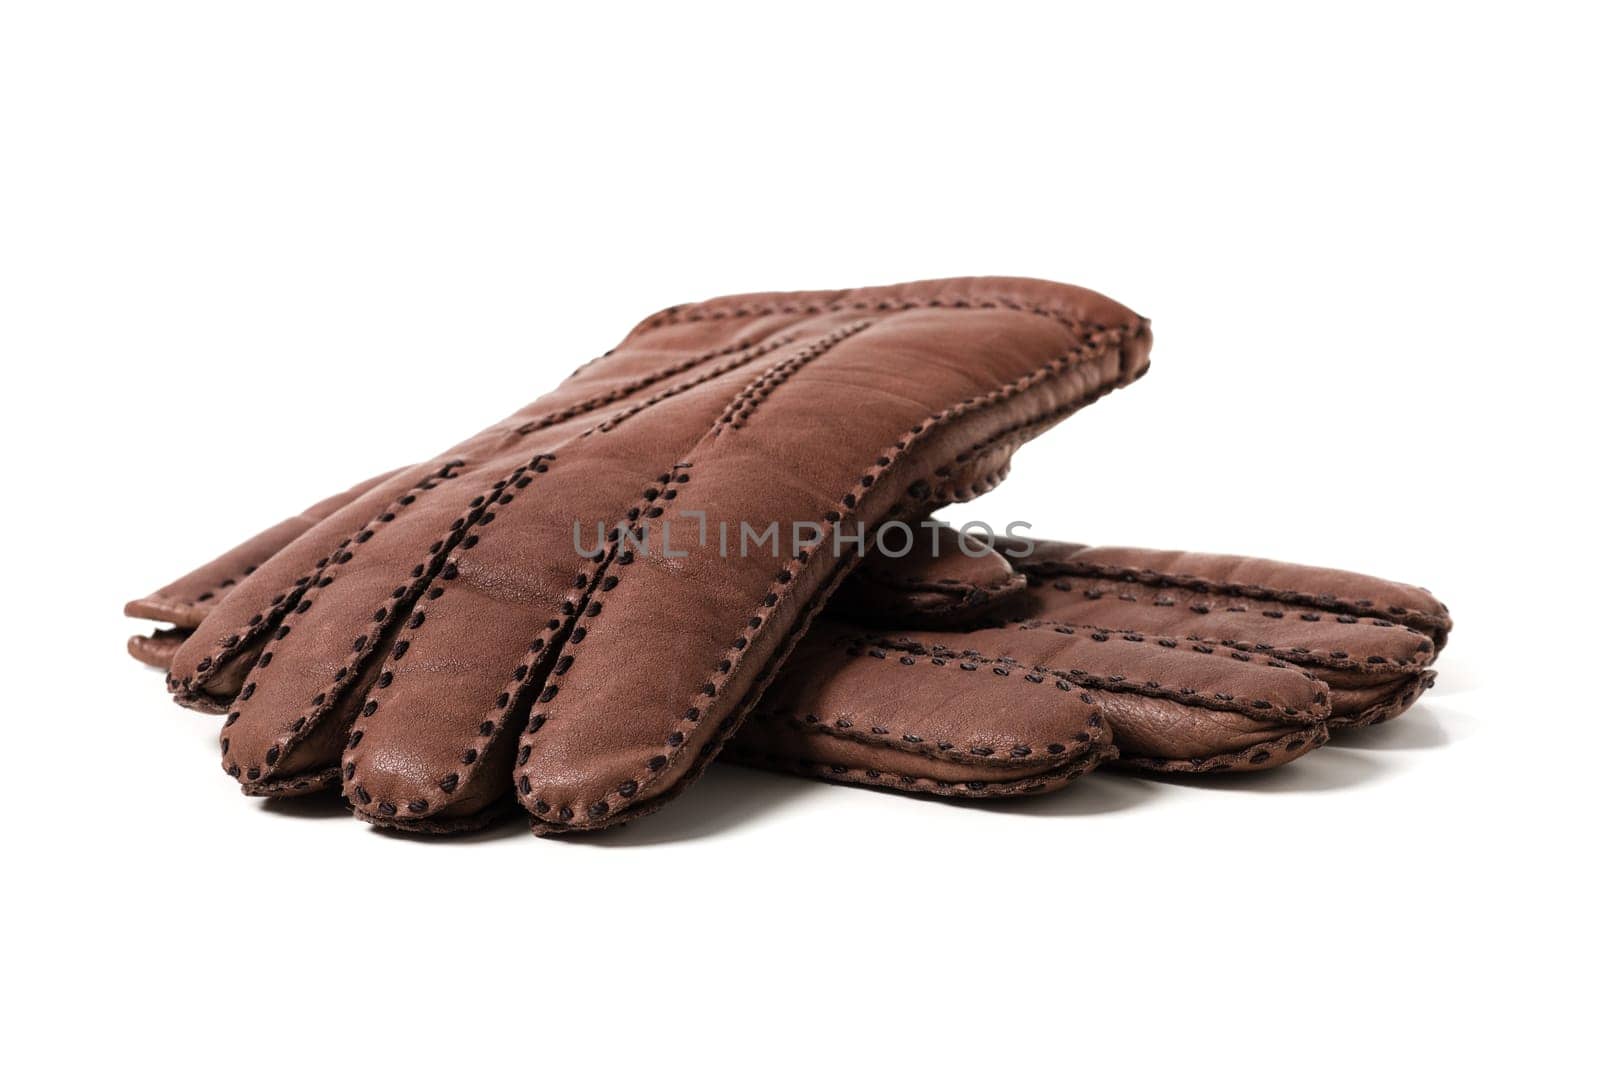 Pair of men's brown leather gloves with accent stitching in dark brown over white background.